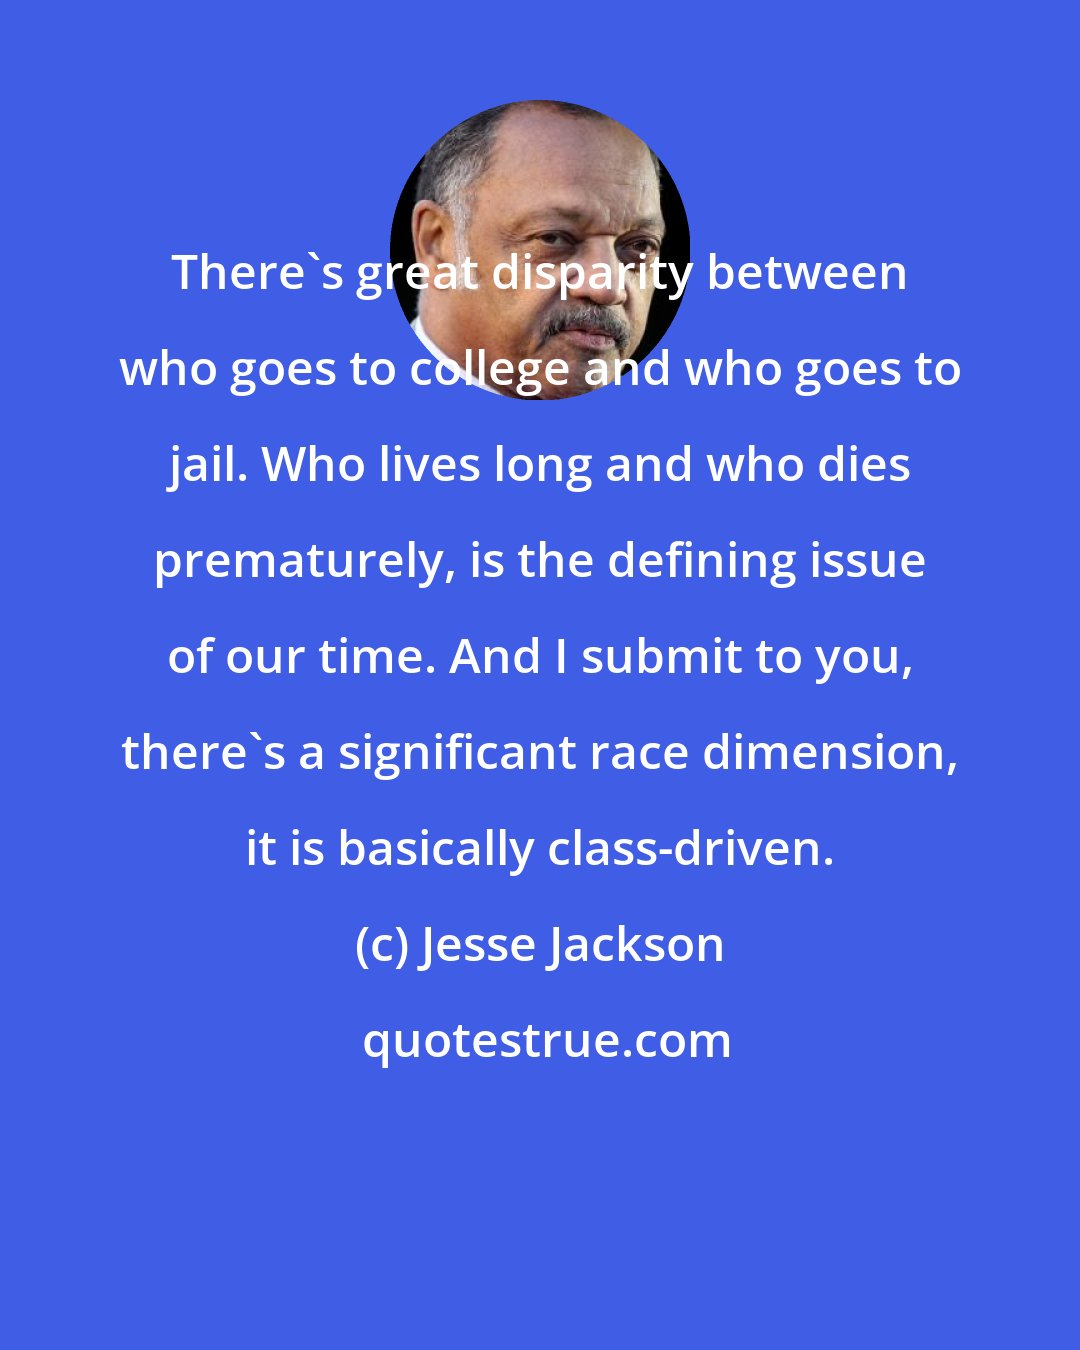 Jesse Jackson: There's great disparity between who goes to college and who goes to jail. Who lives long and who dies prematurely, is the defining issue of our time. And I submit to you, there's a significant race dimension, it is basically class-driven.